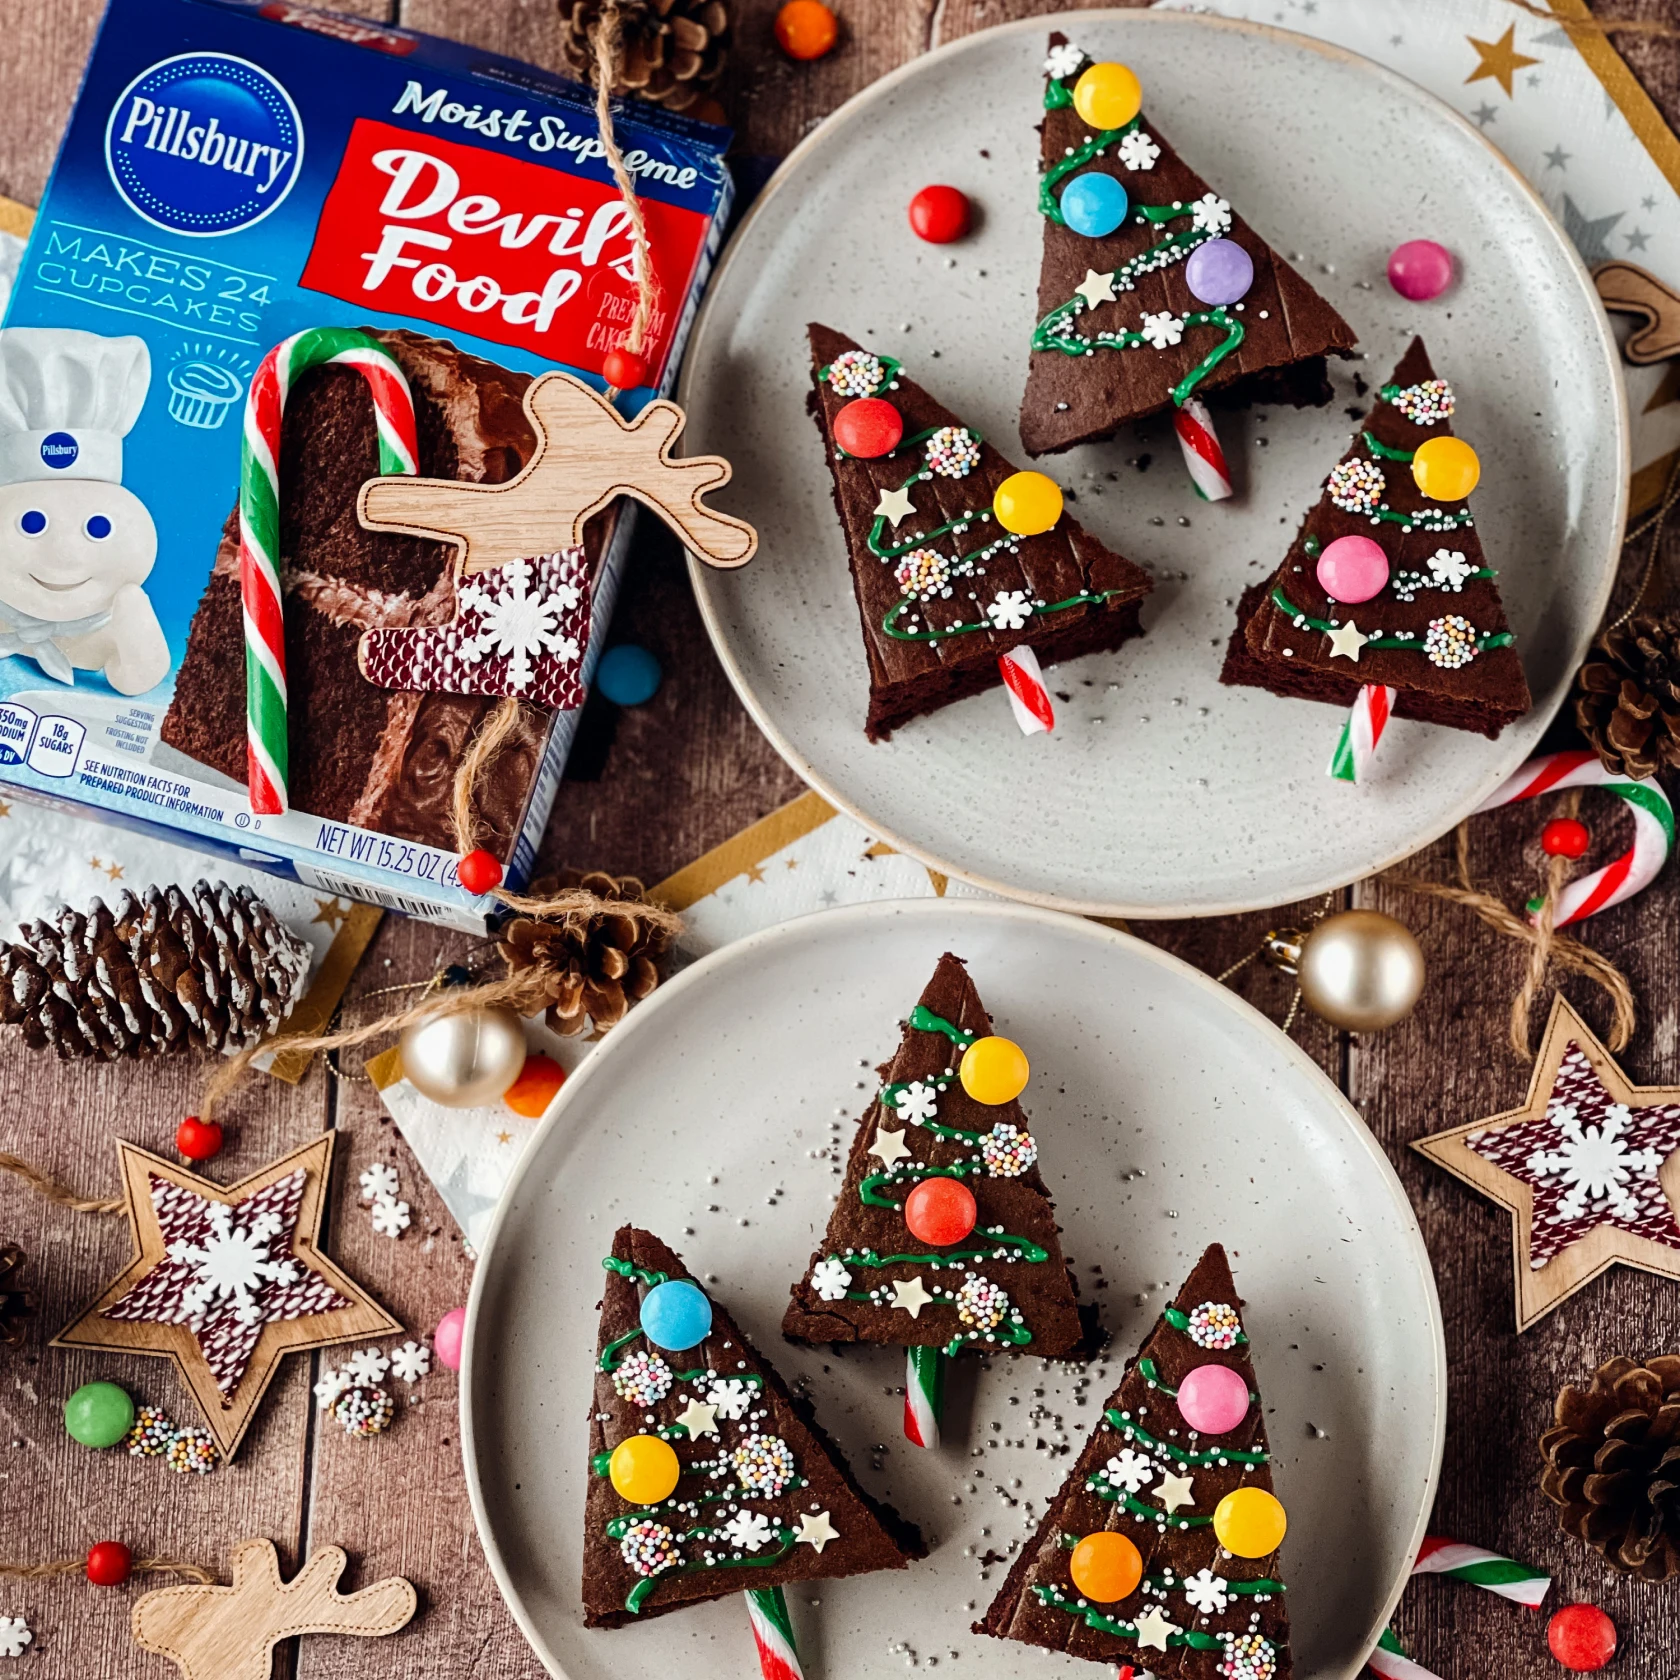 Split image with left side text “Pillsbury Baking boosts awareness and action with holiday video ads” on blue background and right side featuring a box of Devil’s Food cake mix posed next to 6 plated holiday tree-shaped treats. 